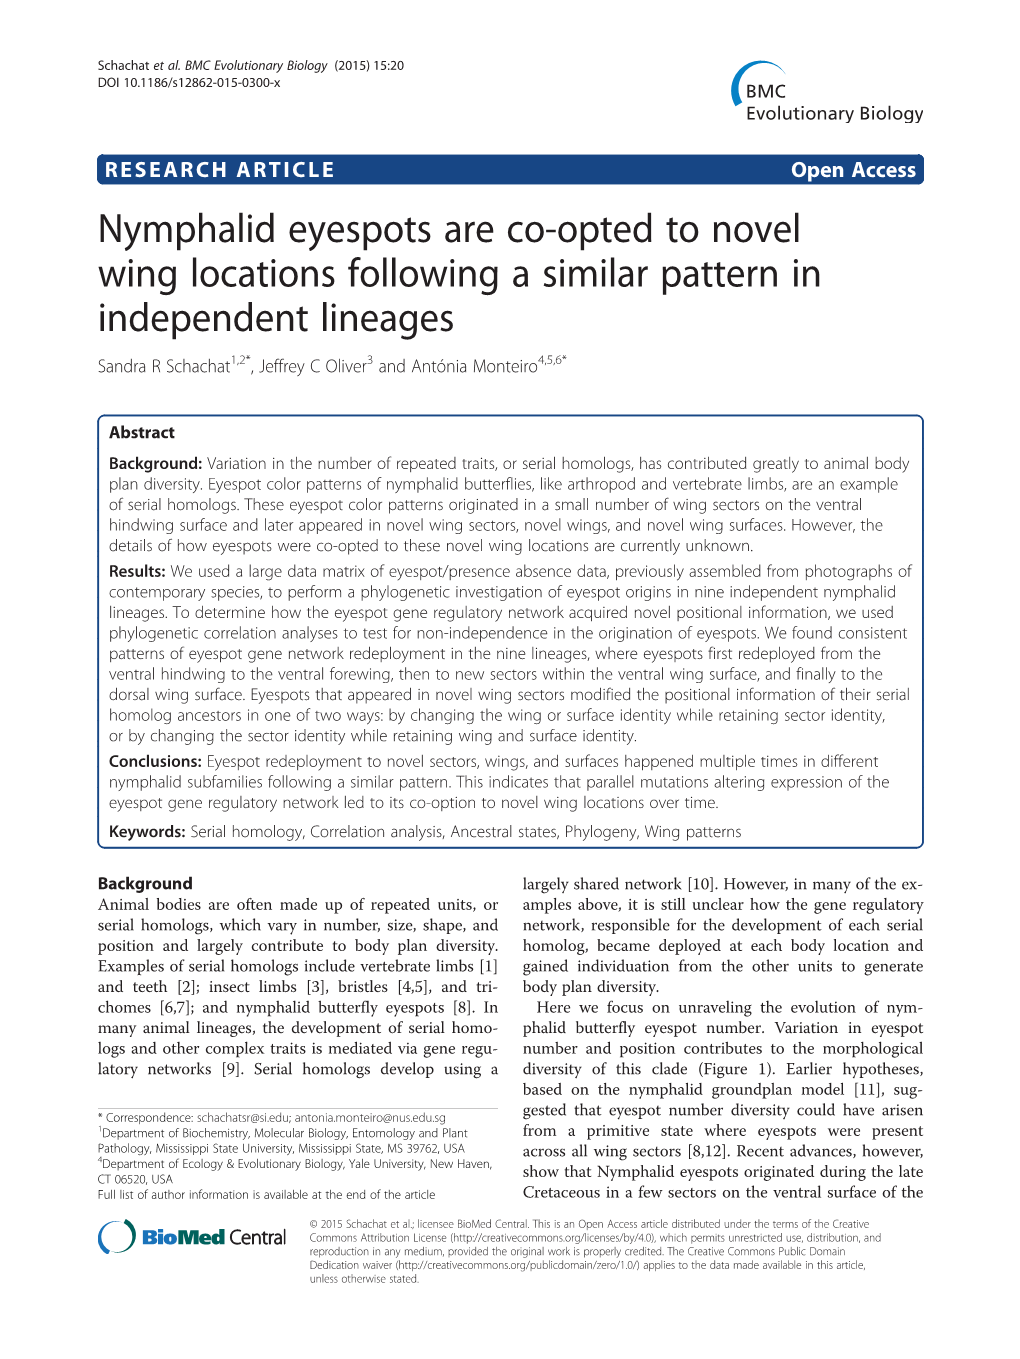 Nymphalid Eyespots Are Co-Opted to Novel Wing